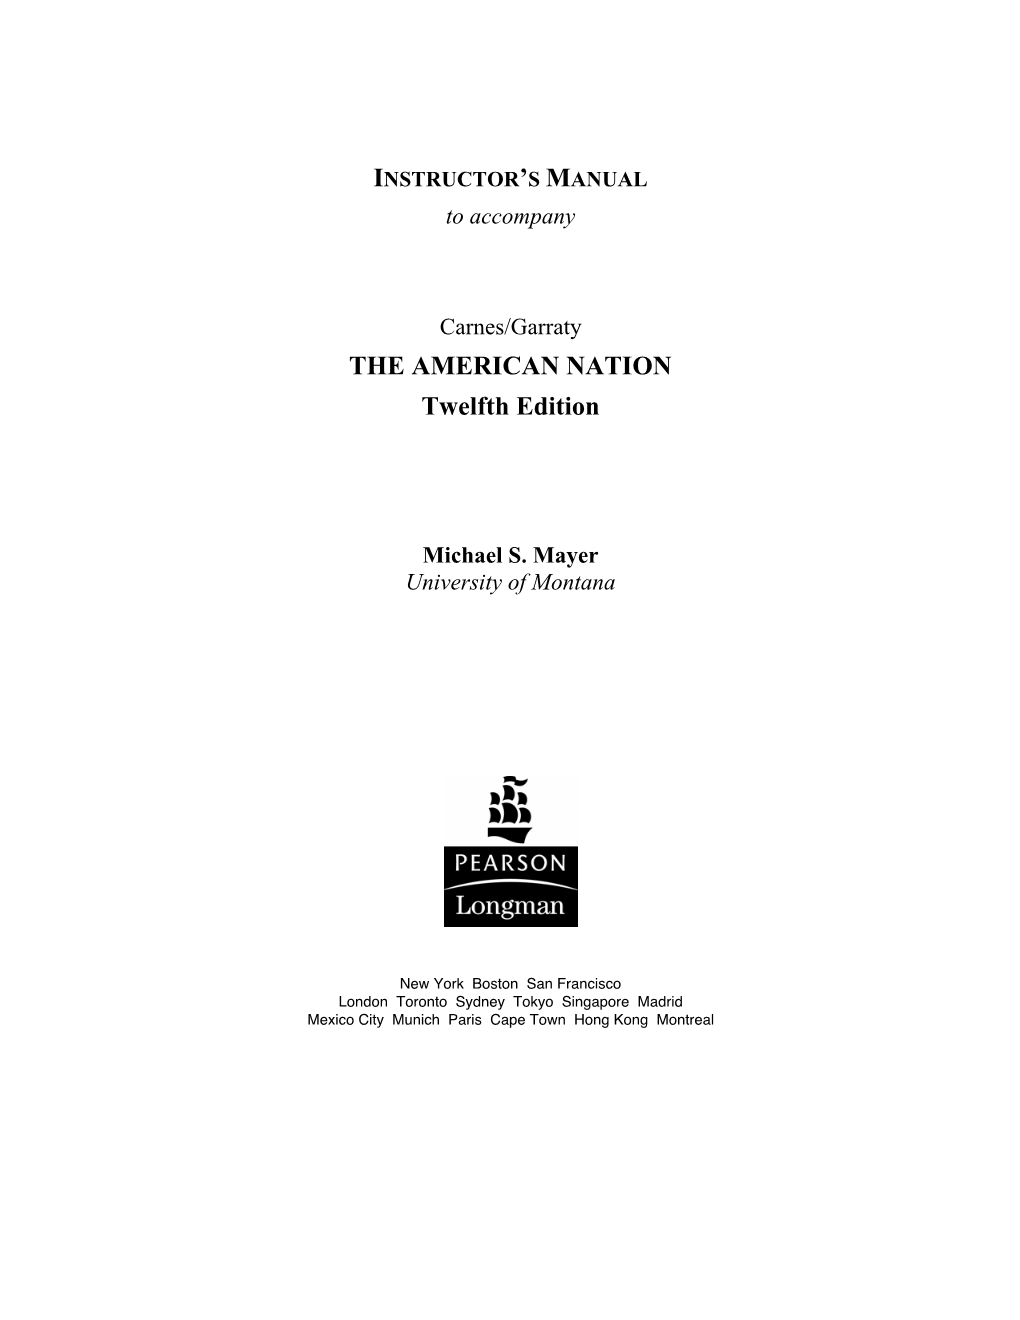 THE AMERICAN NATION Twelfth Edition